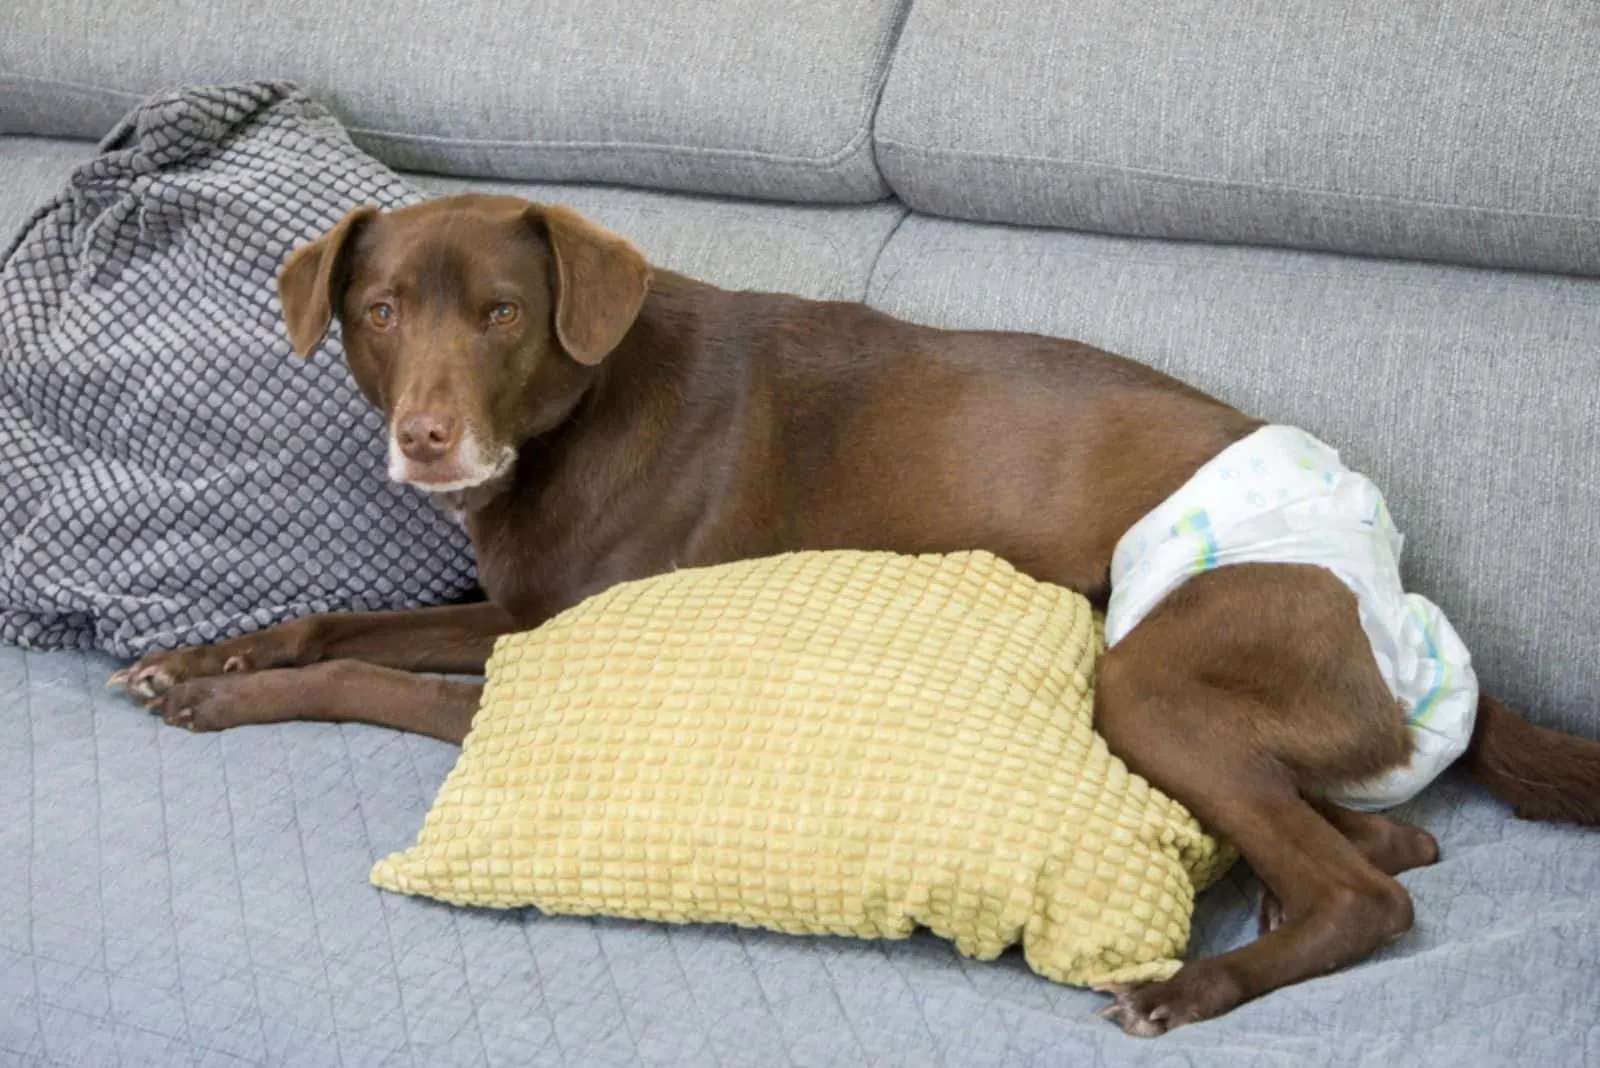 Dog with special needs wearing a diaper lying down on a couch at home